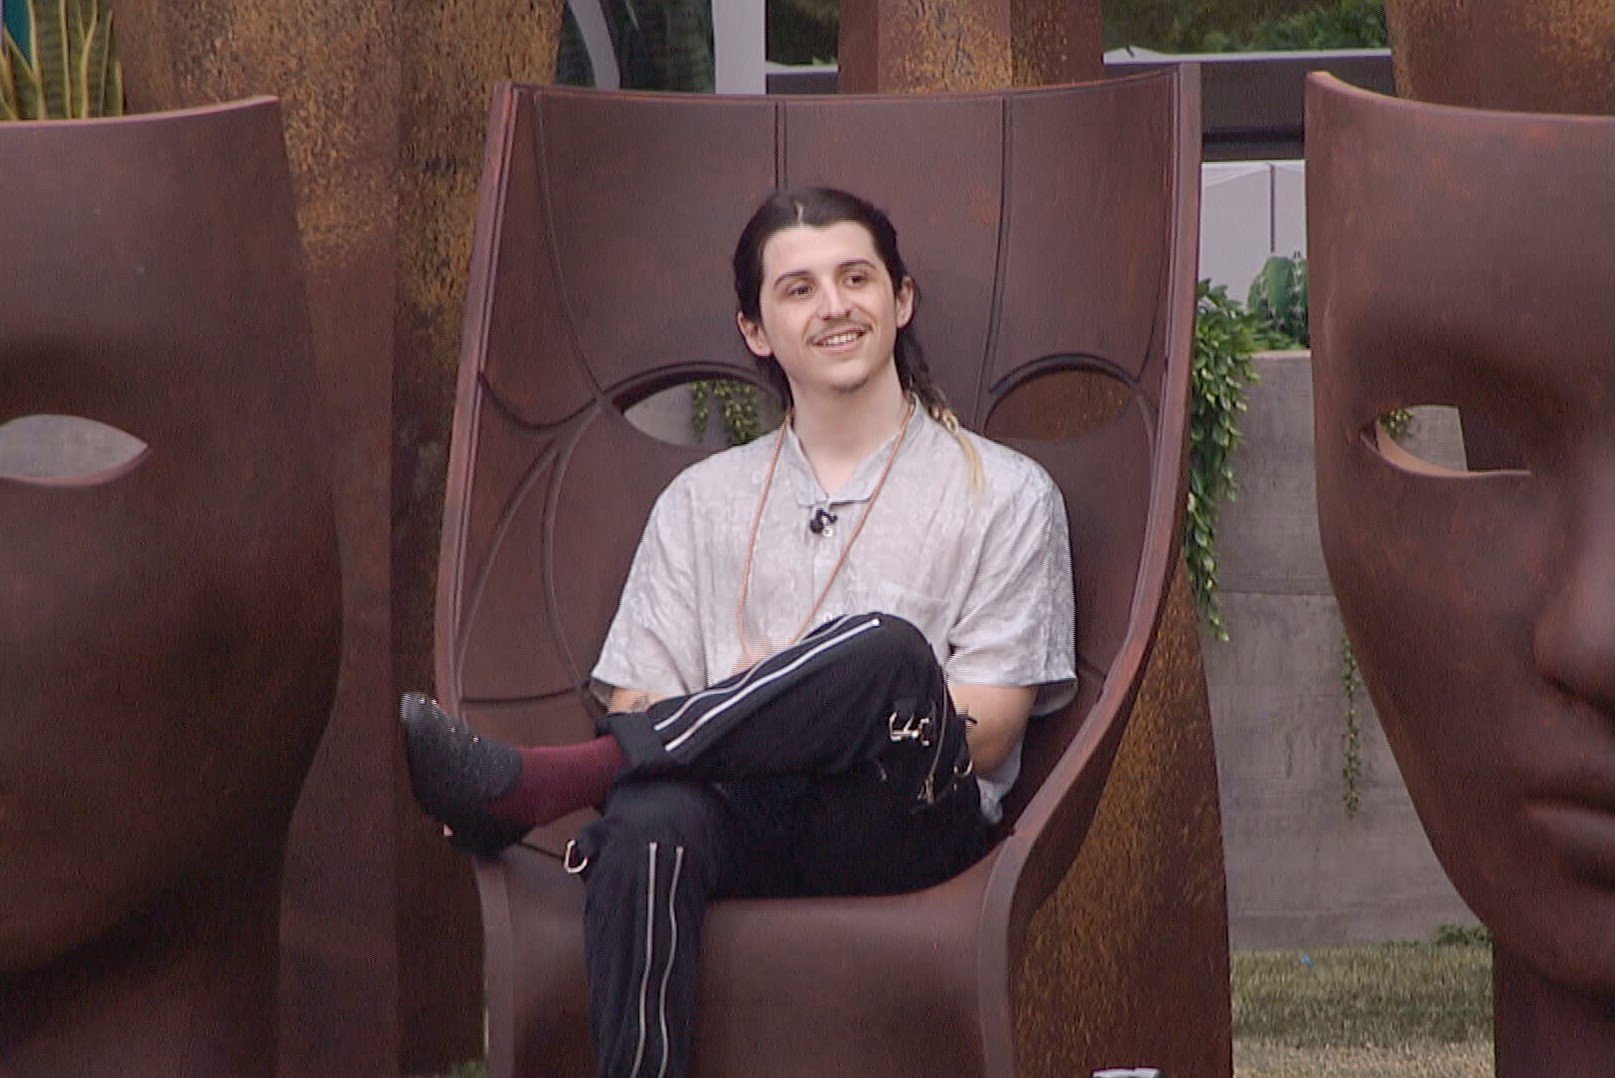 Matthew Turner, who stars in 'Big Brother 24' on CBS, sits in a tiki chair and wears a light gray shirt and black joggers.